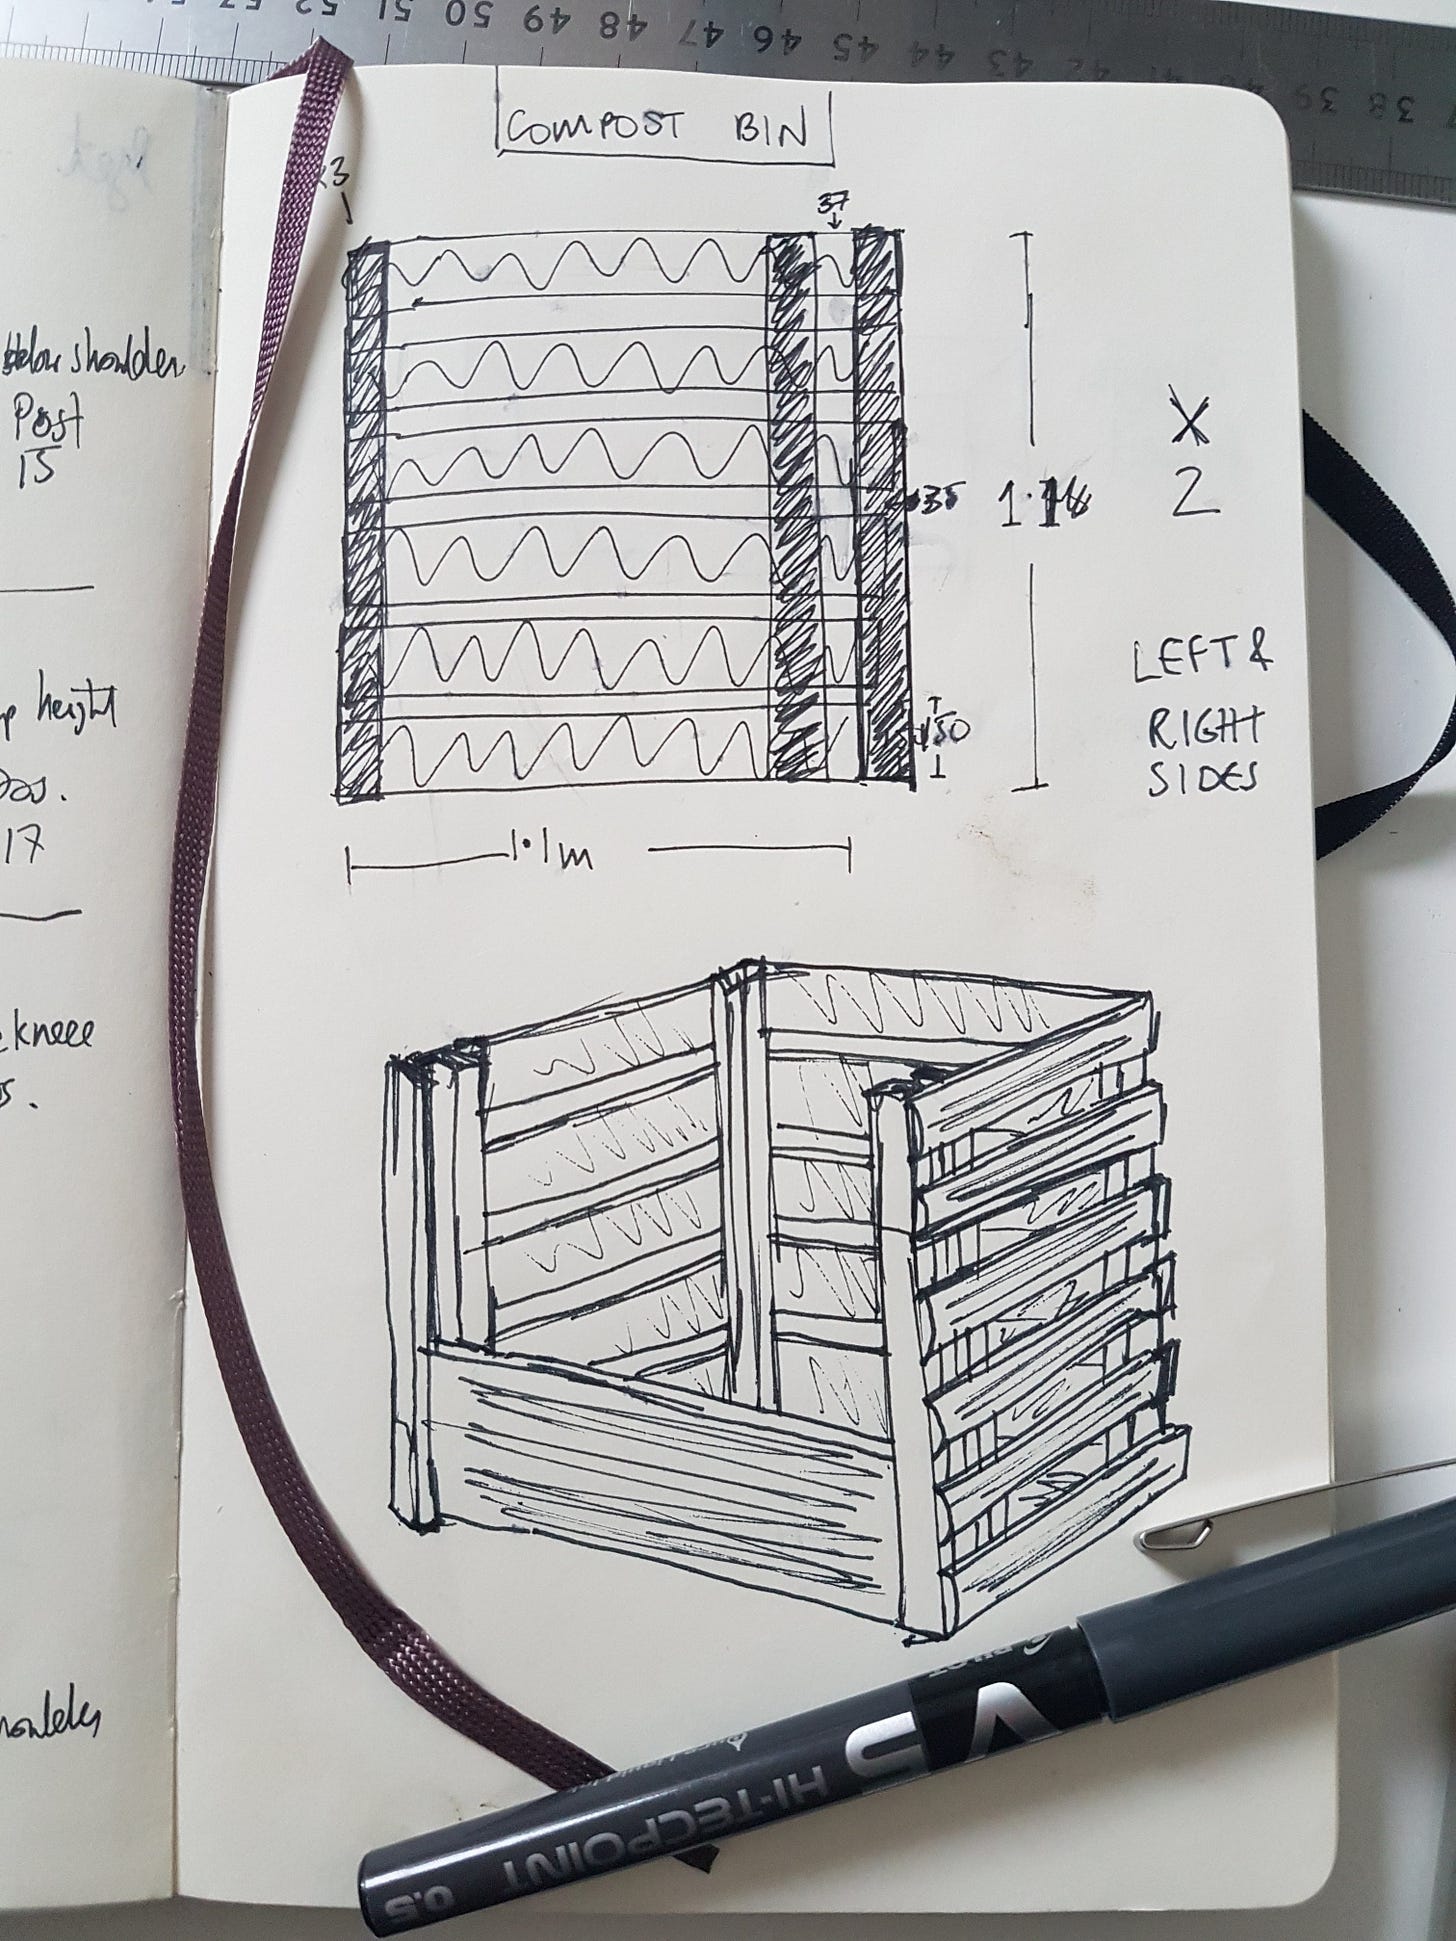 Sketches and measurements of a compost bin in my notepad